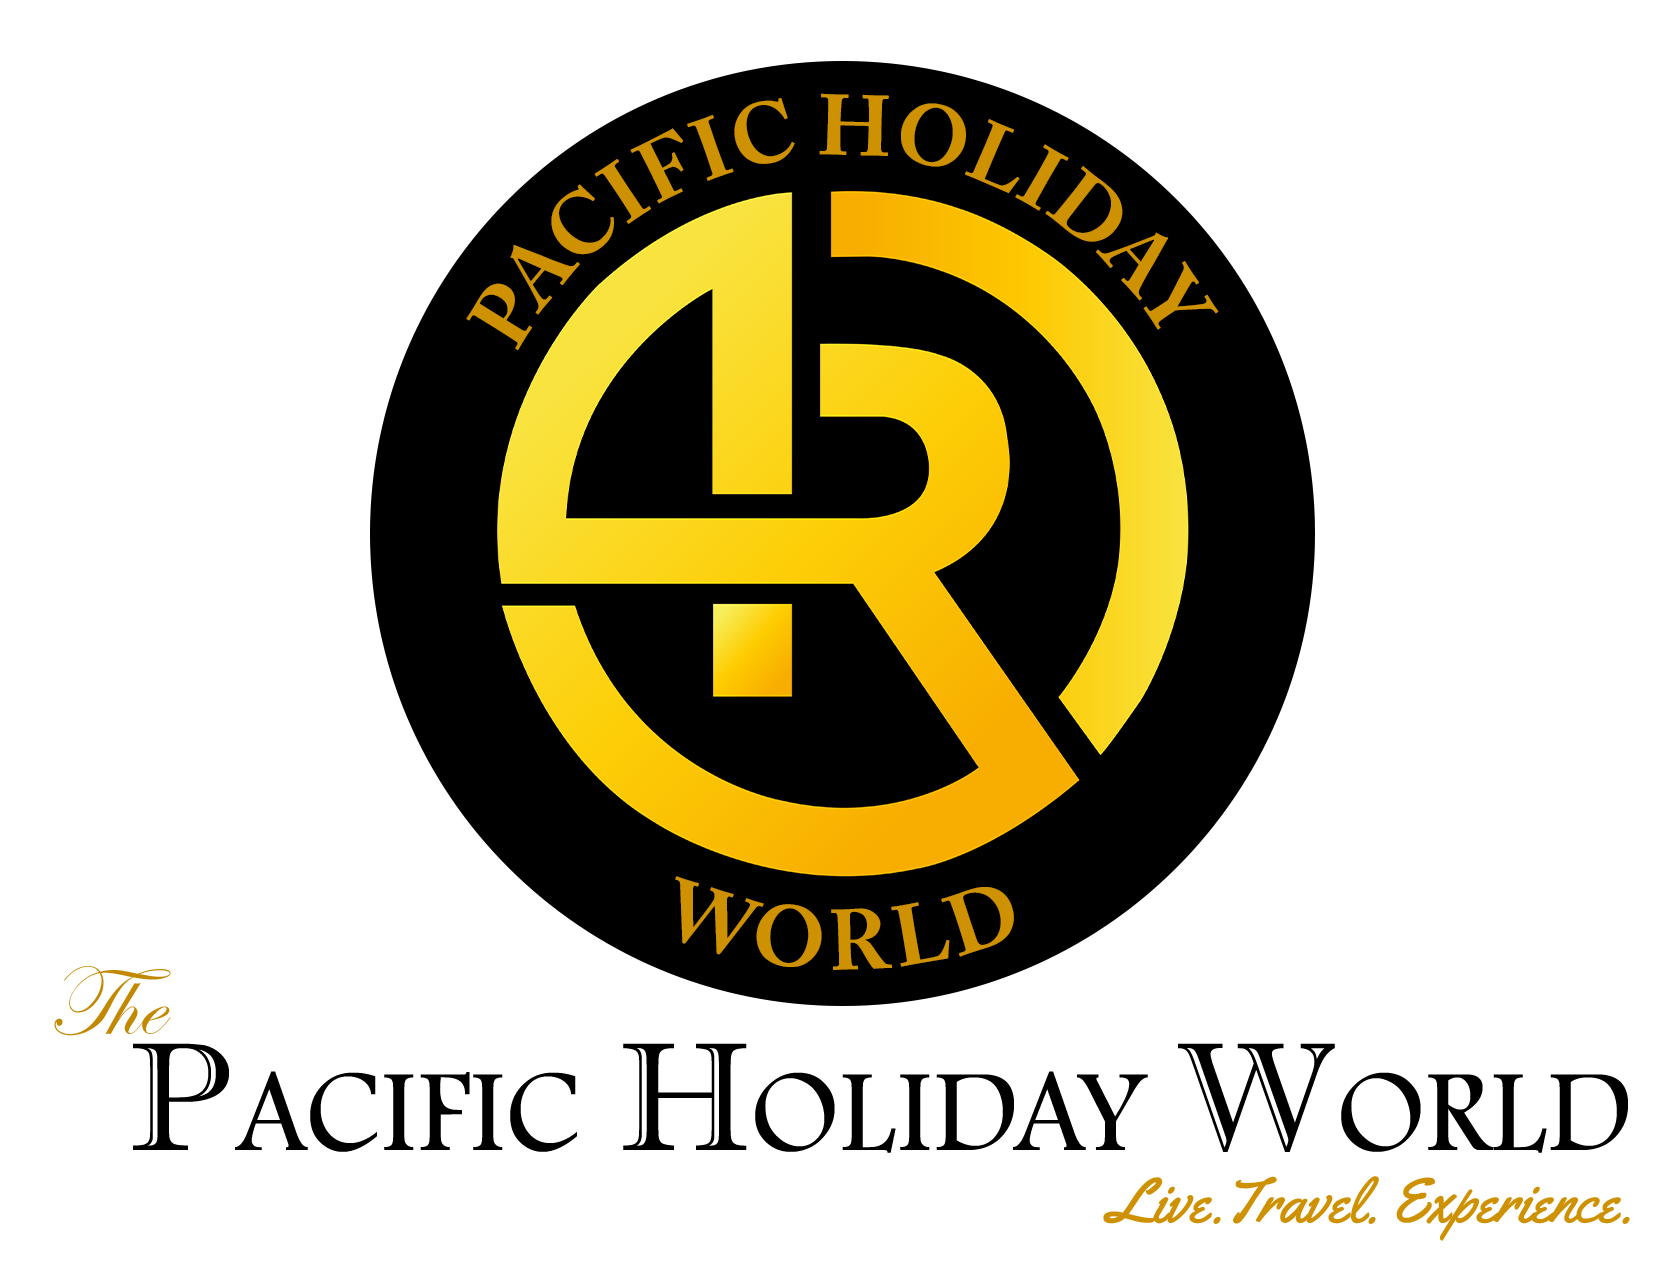 the pacific holiday world